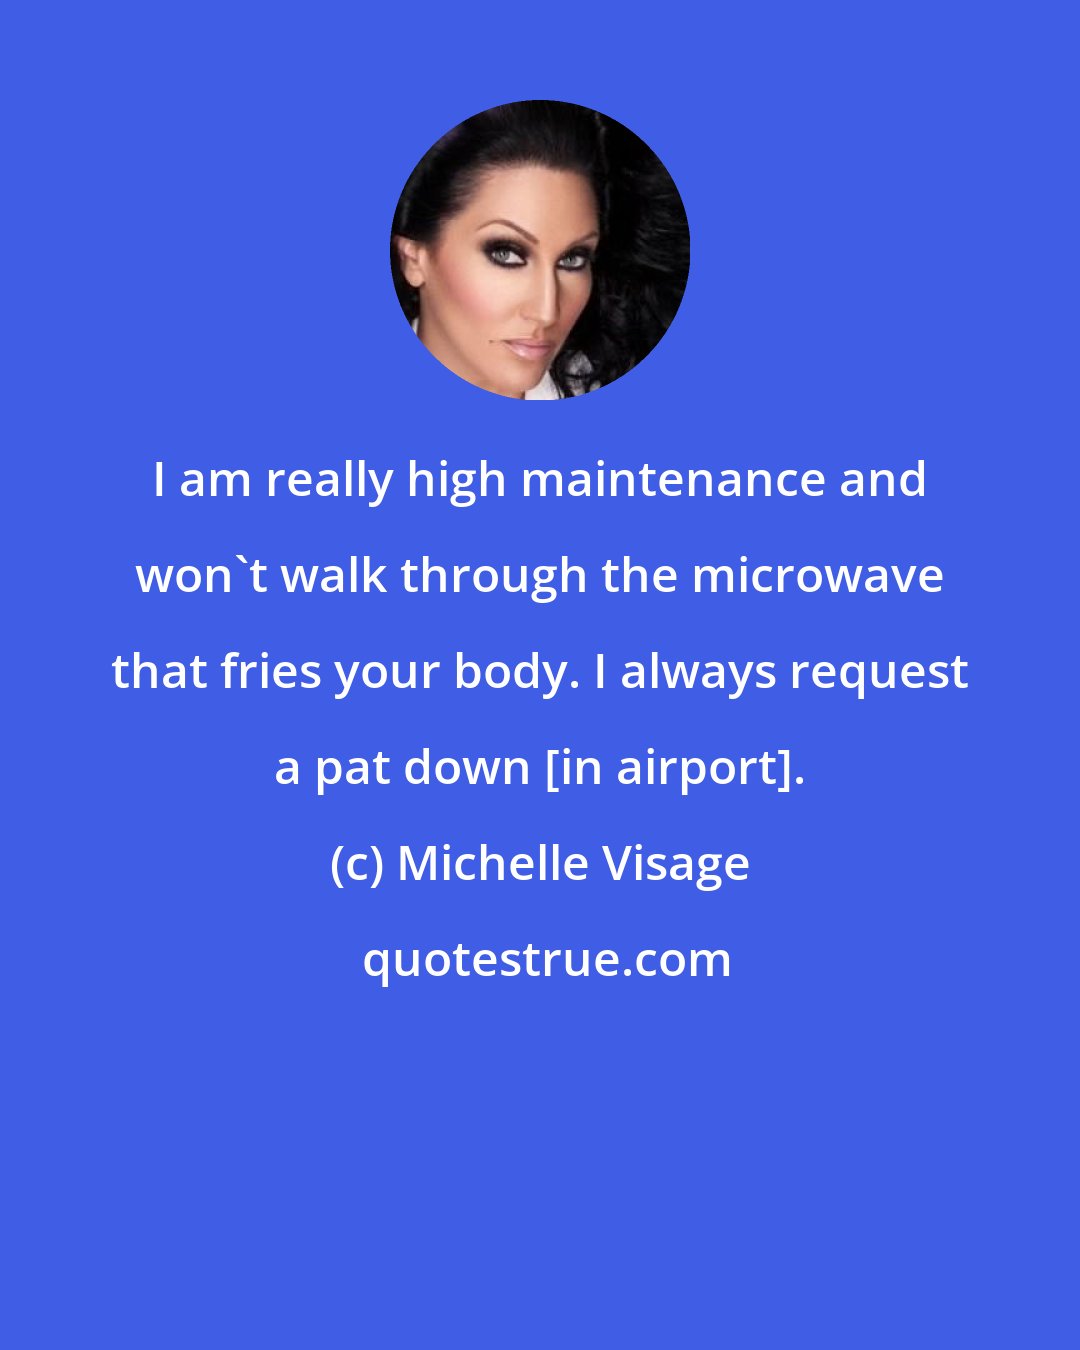 Michelle Visage: I am really high maintenance and won't walk through the microwave that fries your body. I always request a pat down [in airport].